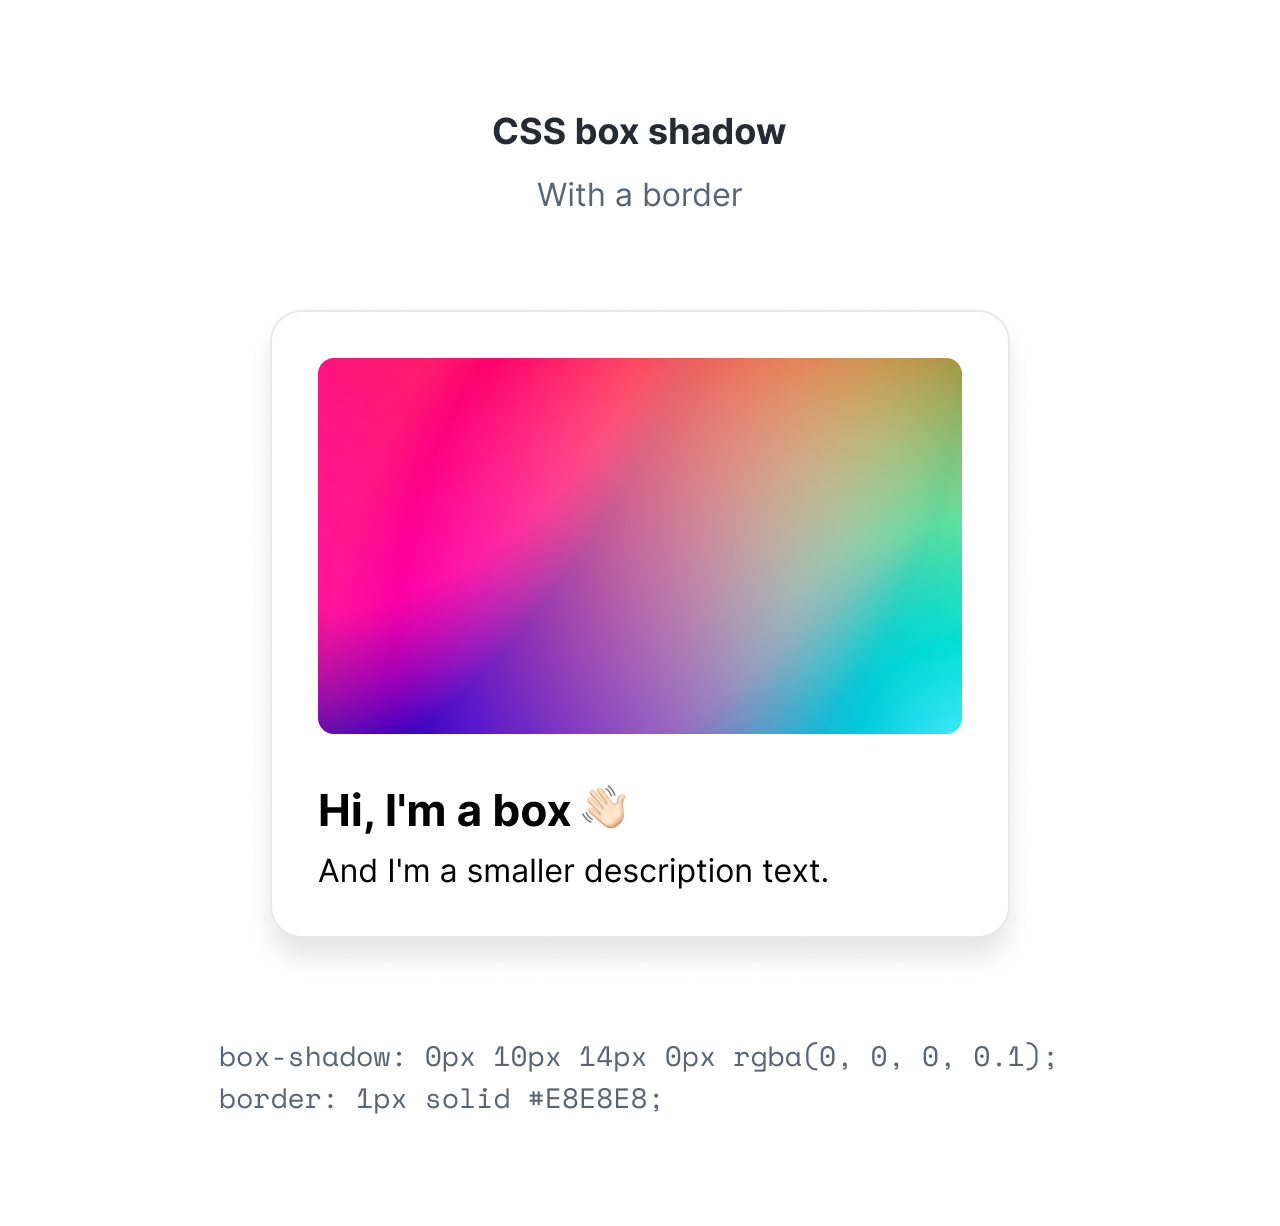 A card component with a CSS box-shadow and border